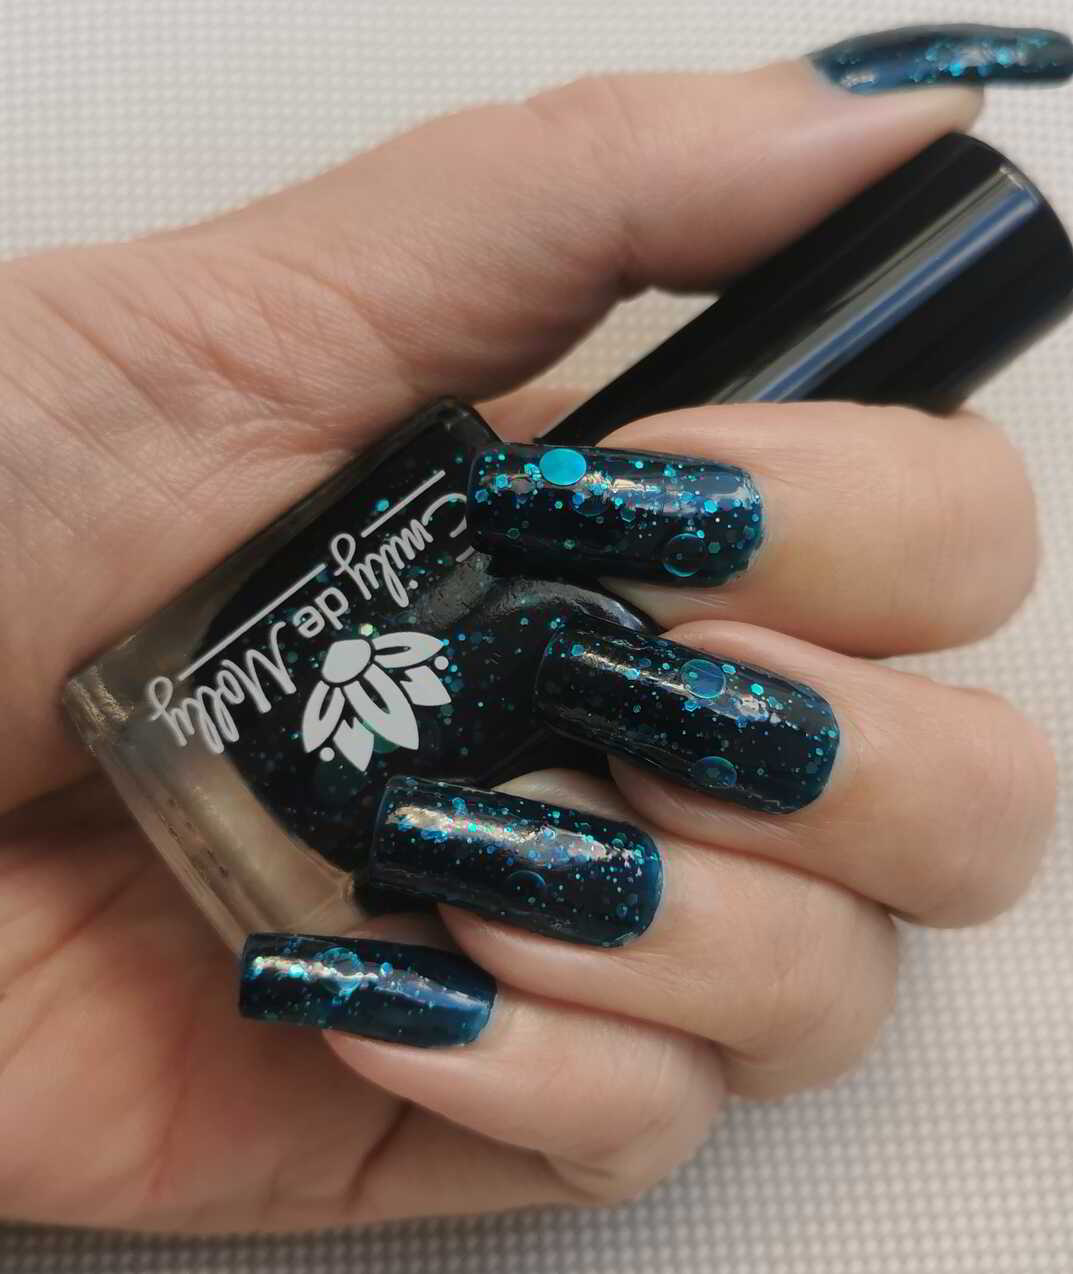 Nail polish manicure of shade Emily de Molly Oceanic Forces